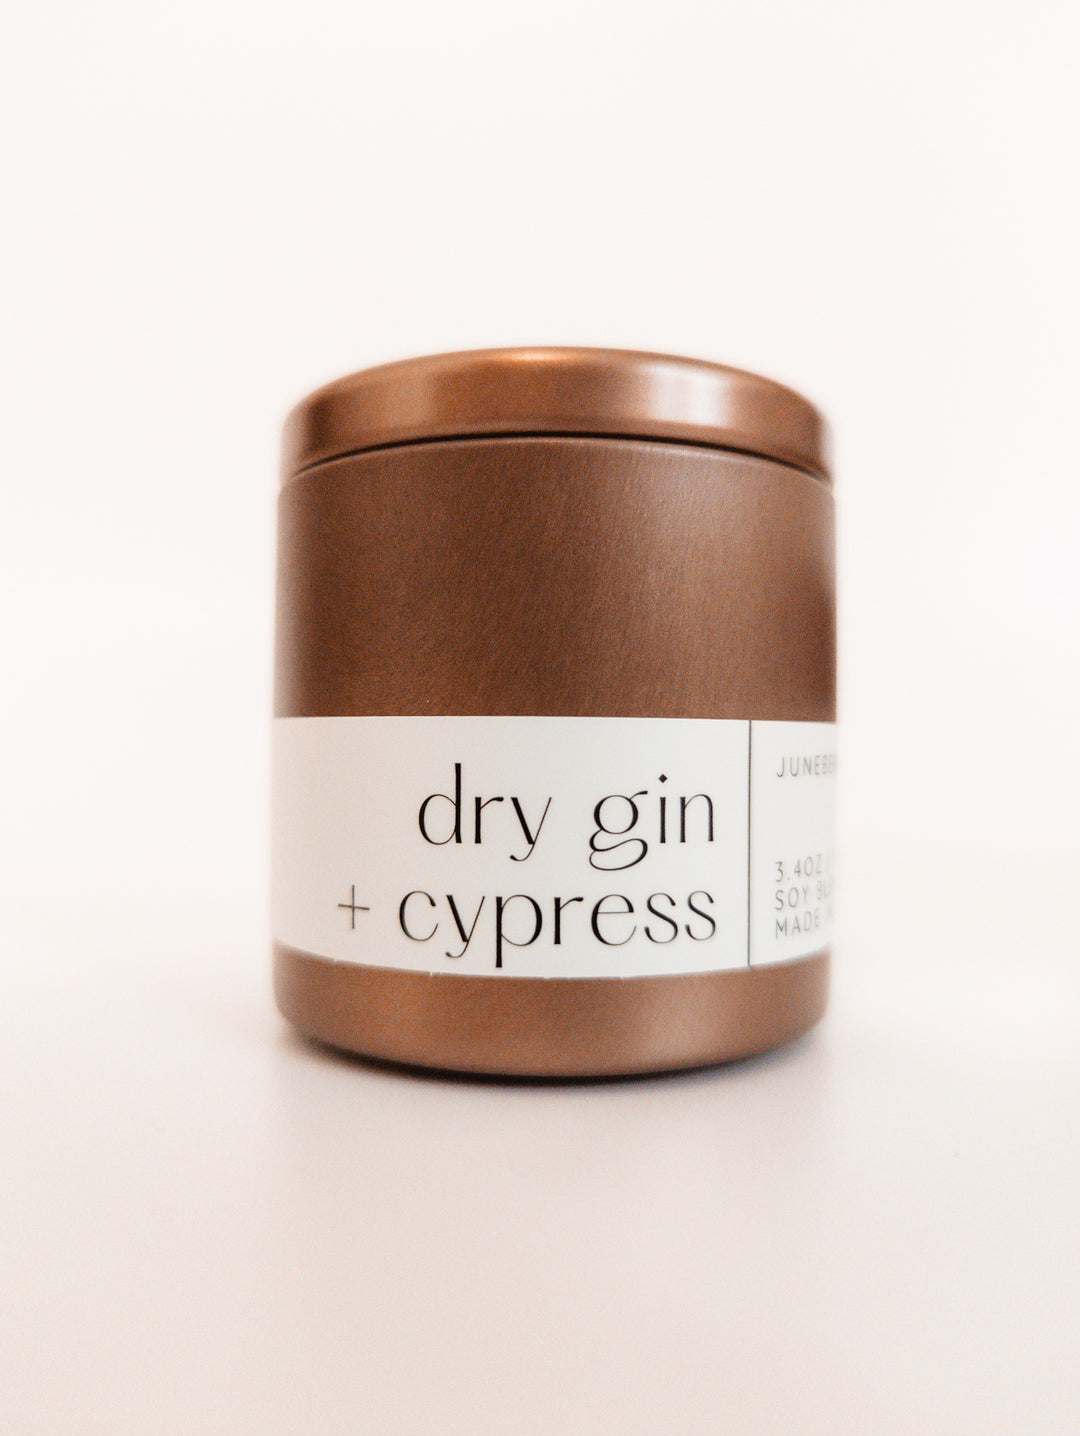 Dry Gin + Cypress Wood Wick Candle